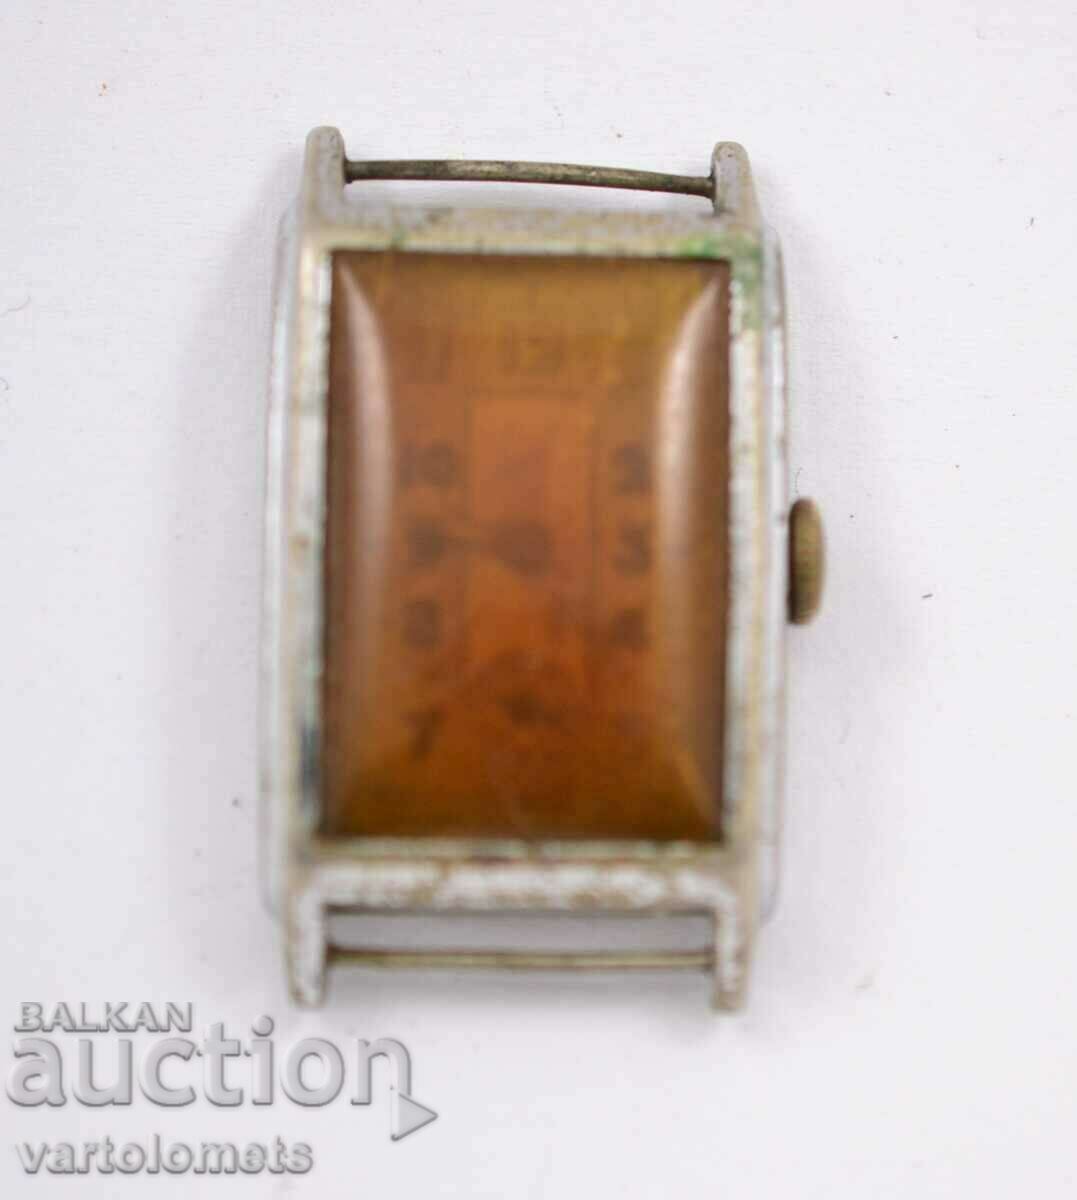 Mechanical Swiss watch from the 1930s - not working